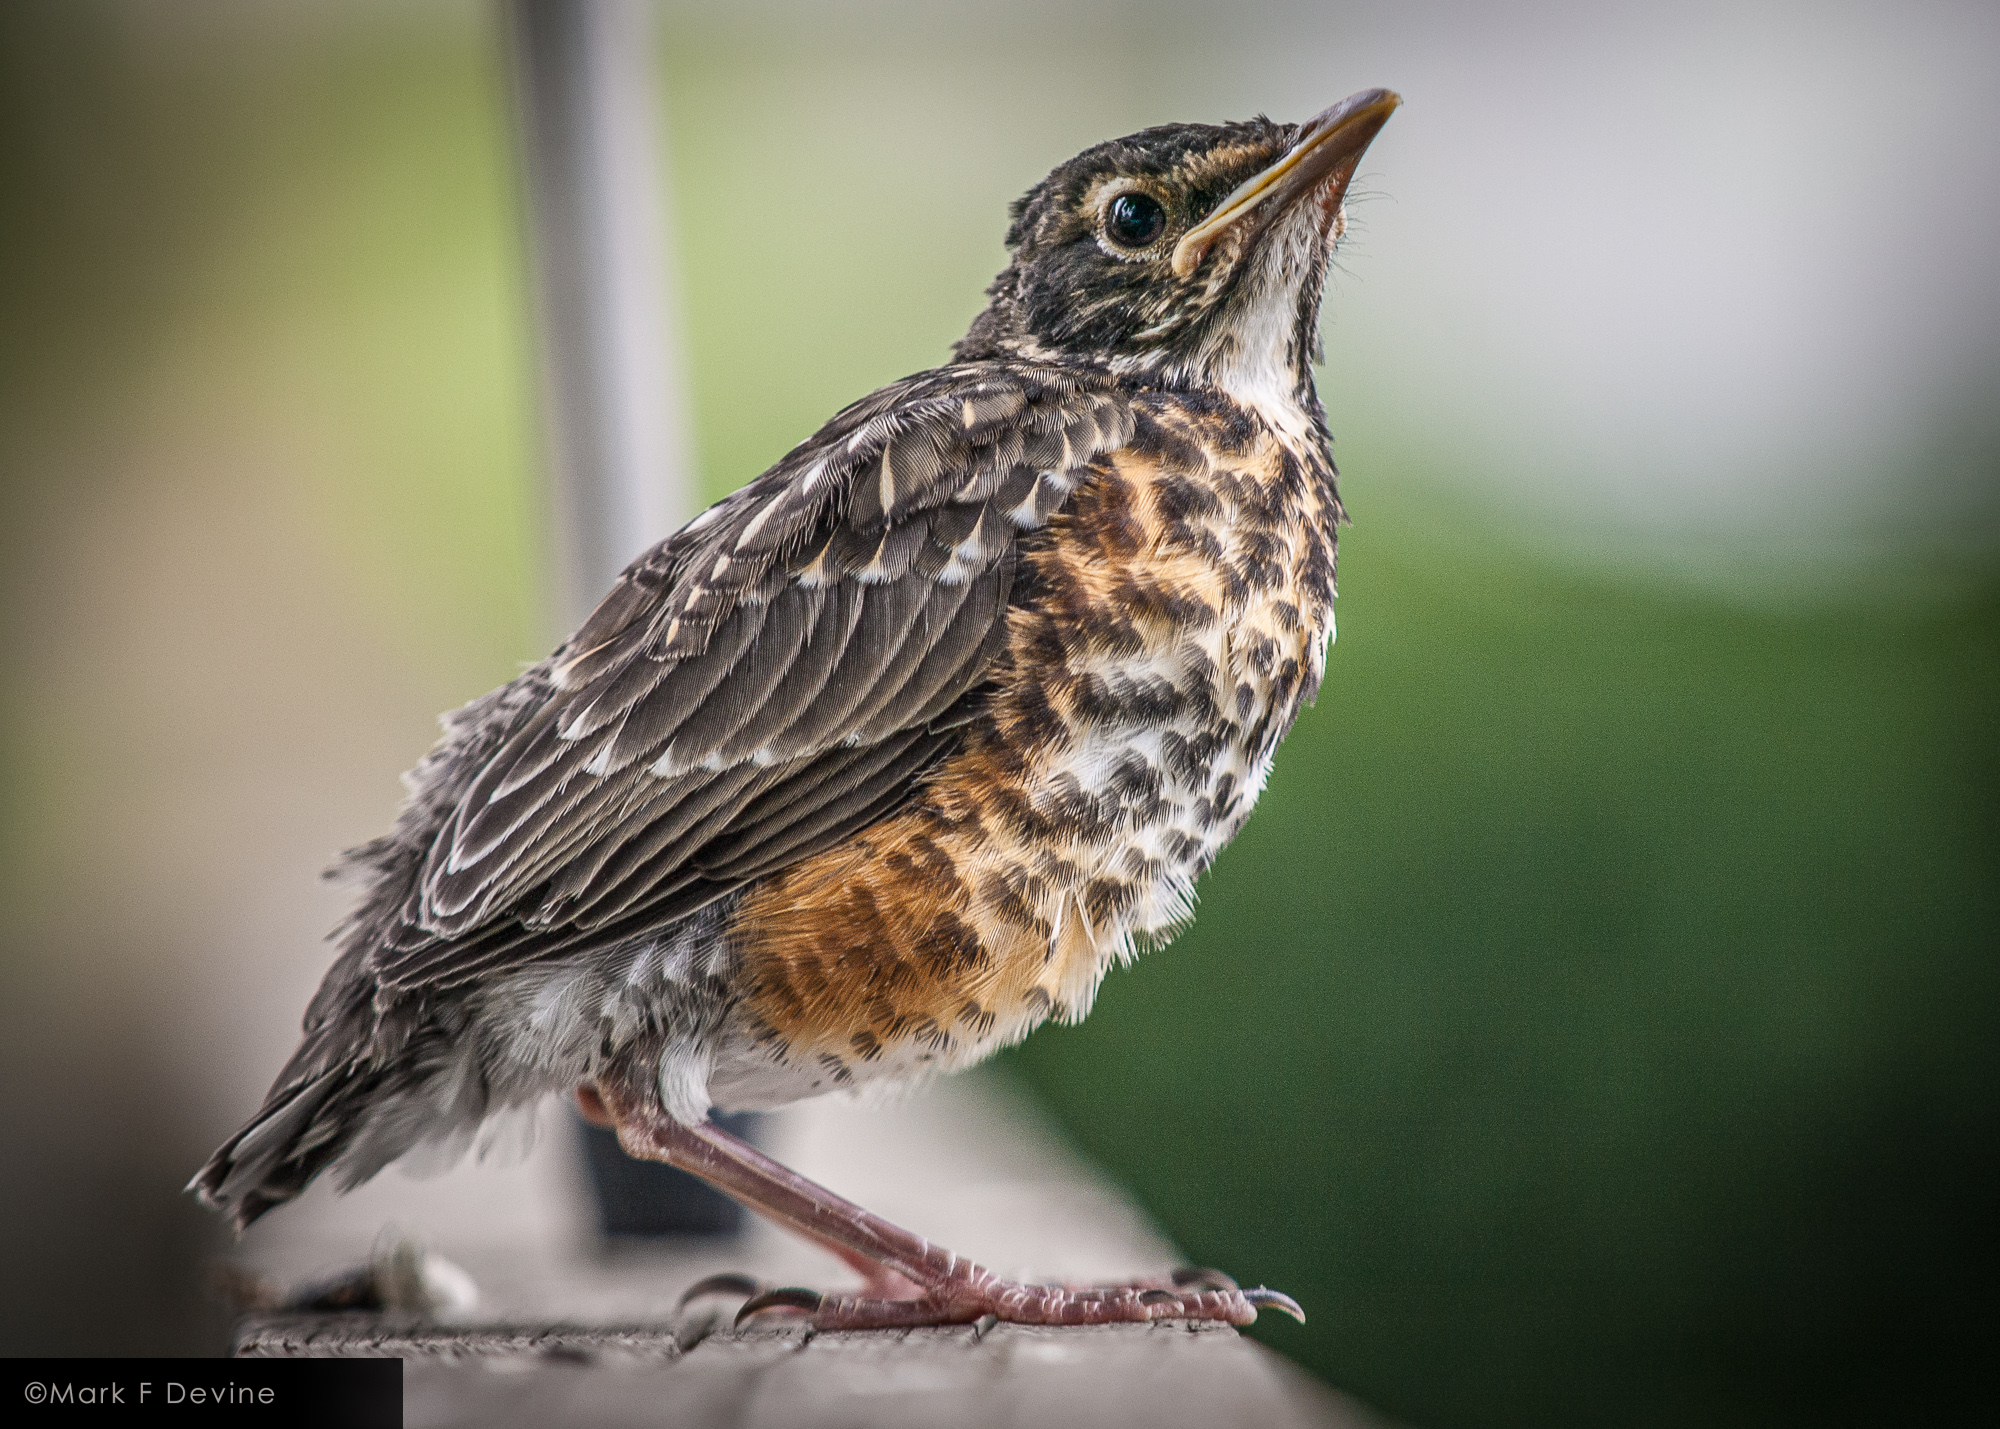 This pensive young robin spent a good while sitting on our fence in peaceful contemplation.